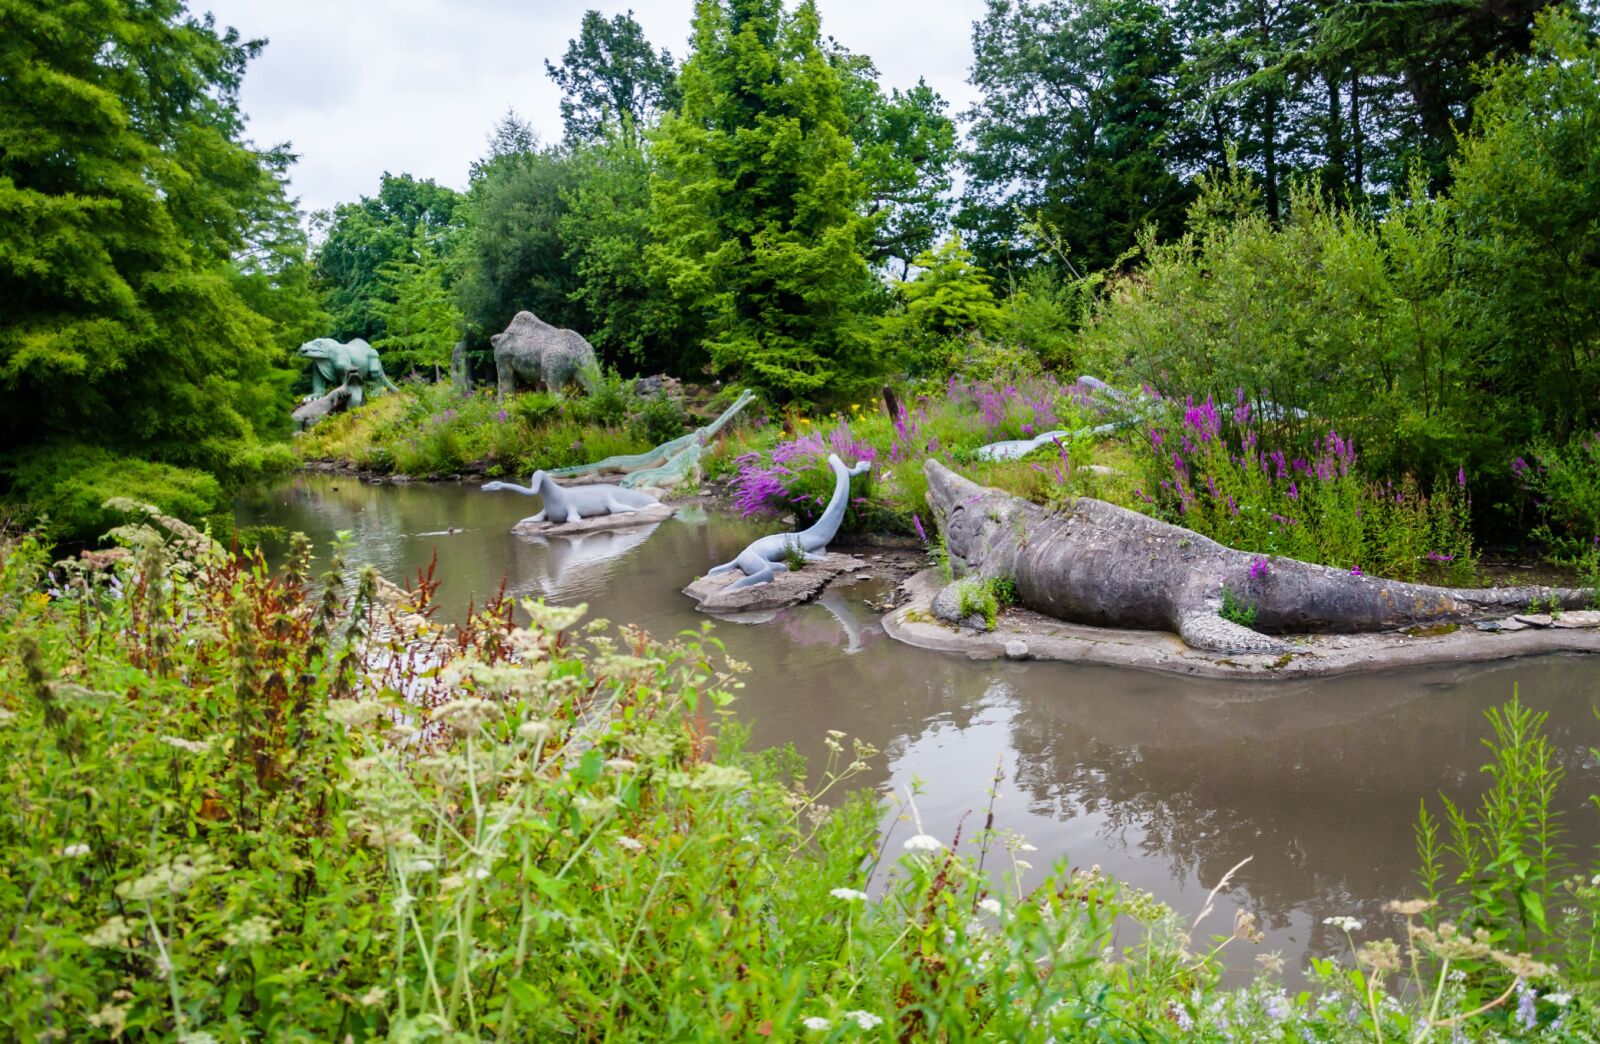 crystal palace parks in london dinosaurs 